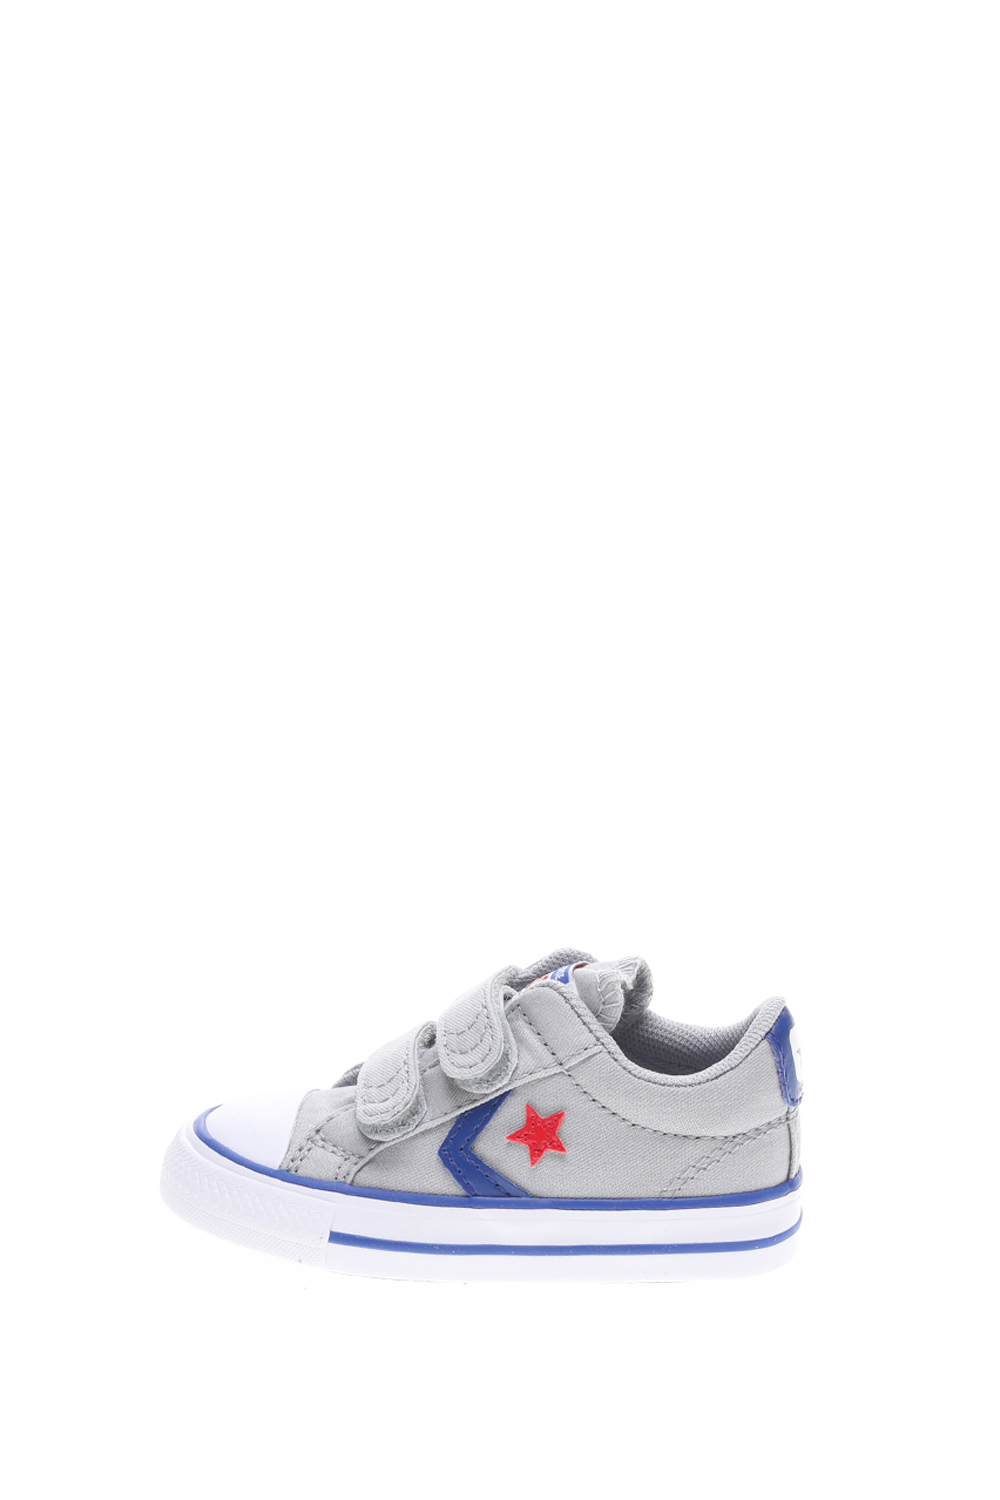 CONVERSE – Βρεφικα sneakers Converse Star Player 2V Ox γκρι